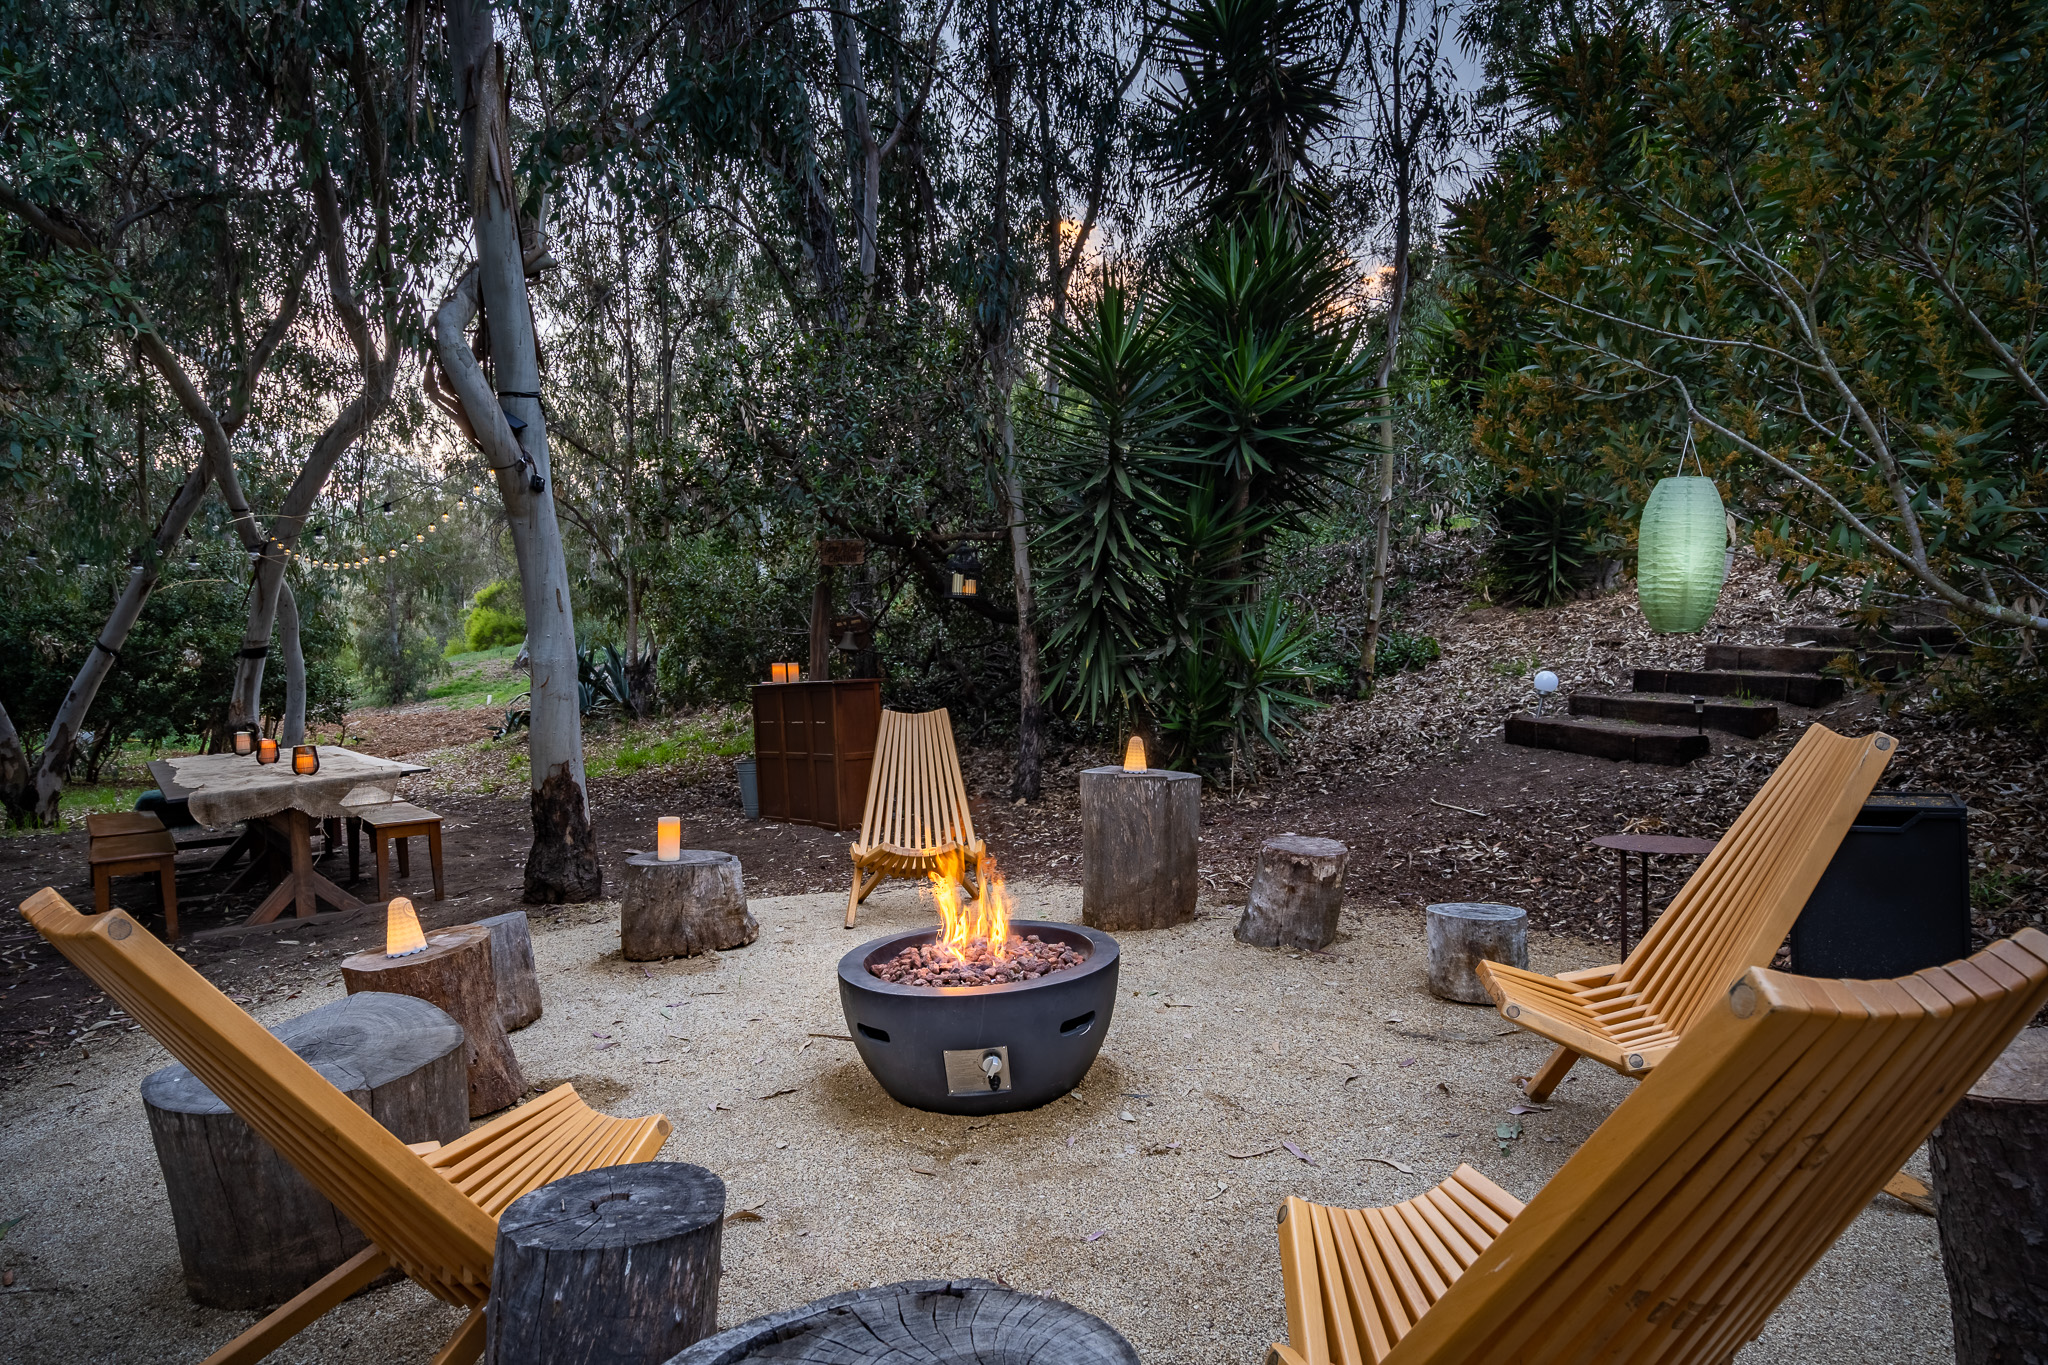 exterior seating area with chairs and fireplace, outdoor meeting and communal area with trees and plants